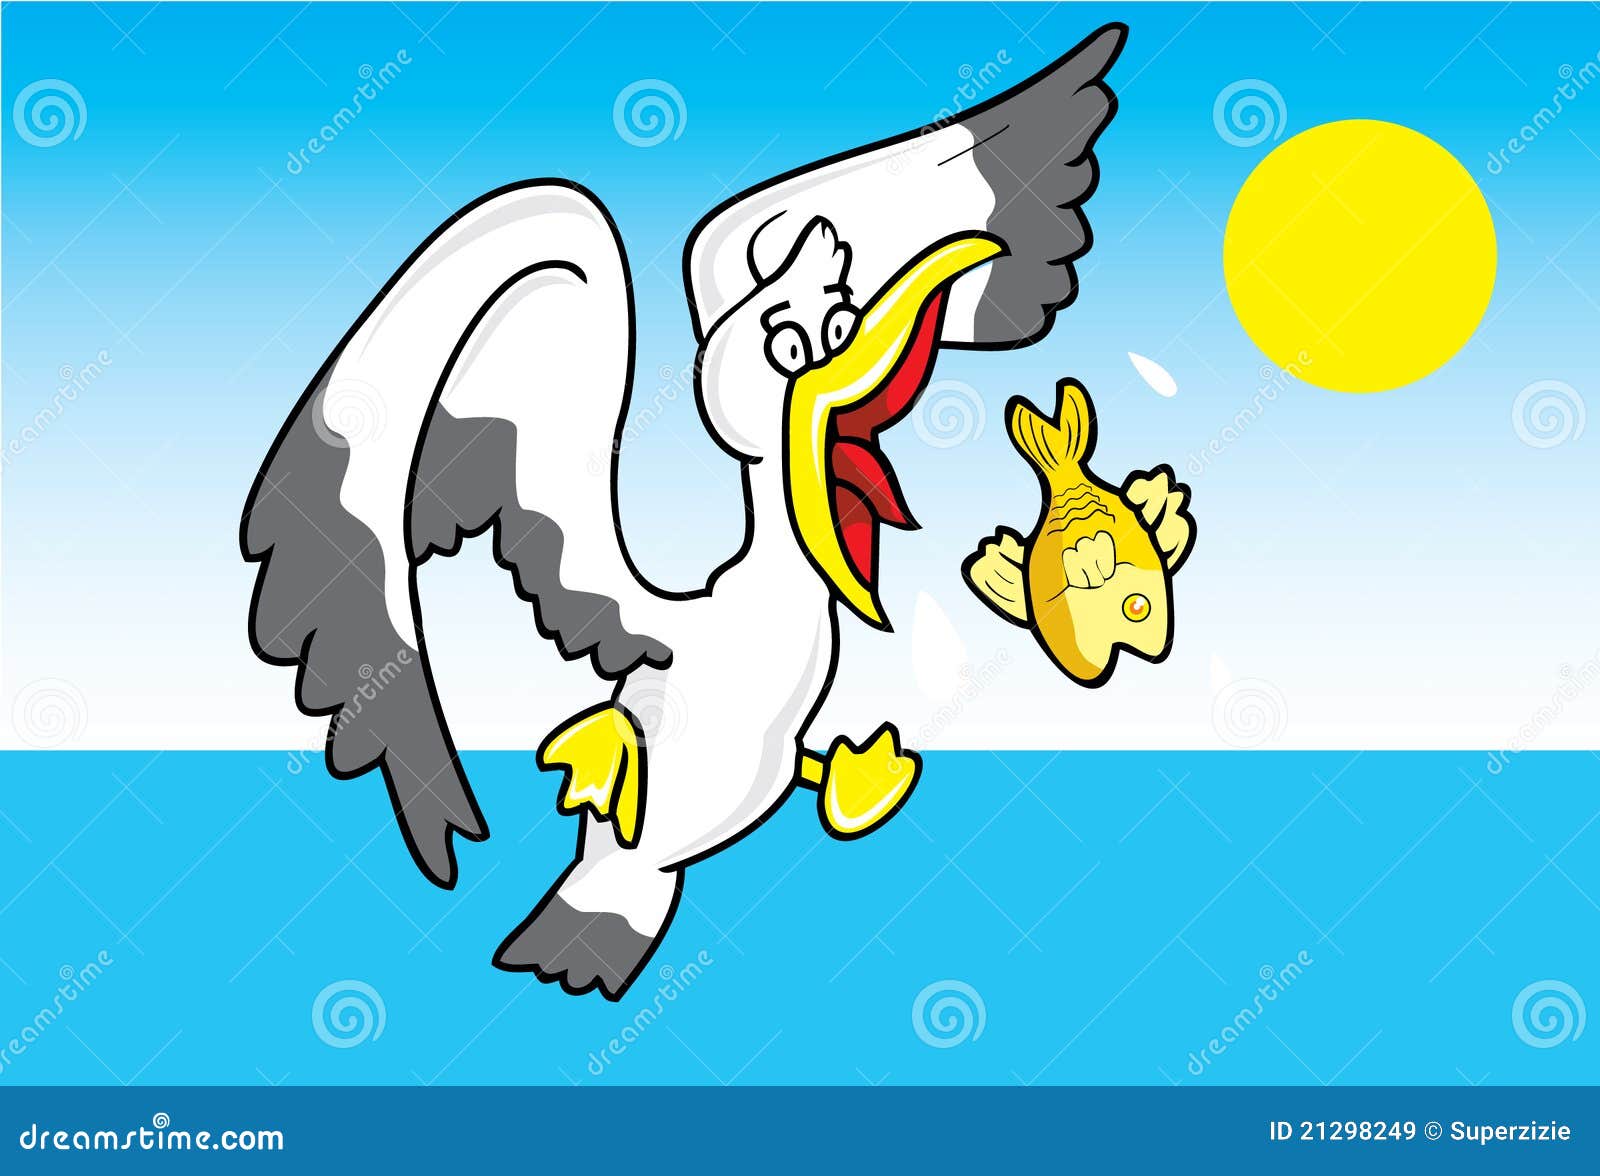 clipart catching a fish - photo #36